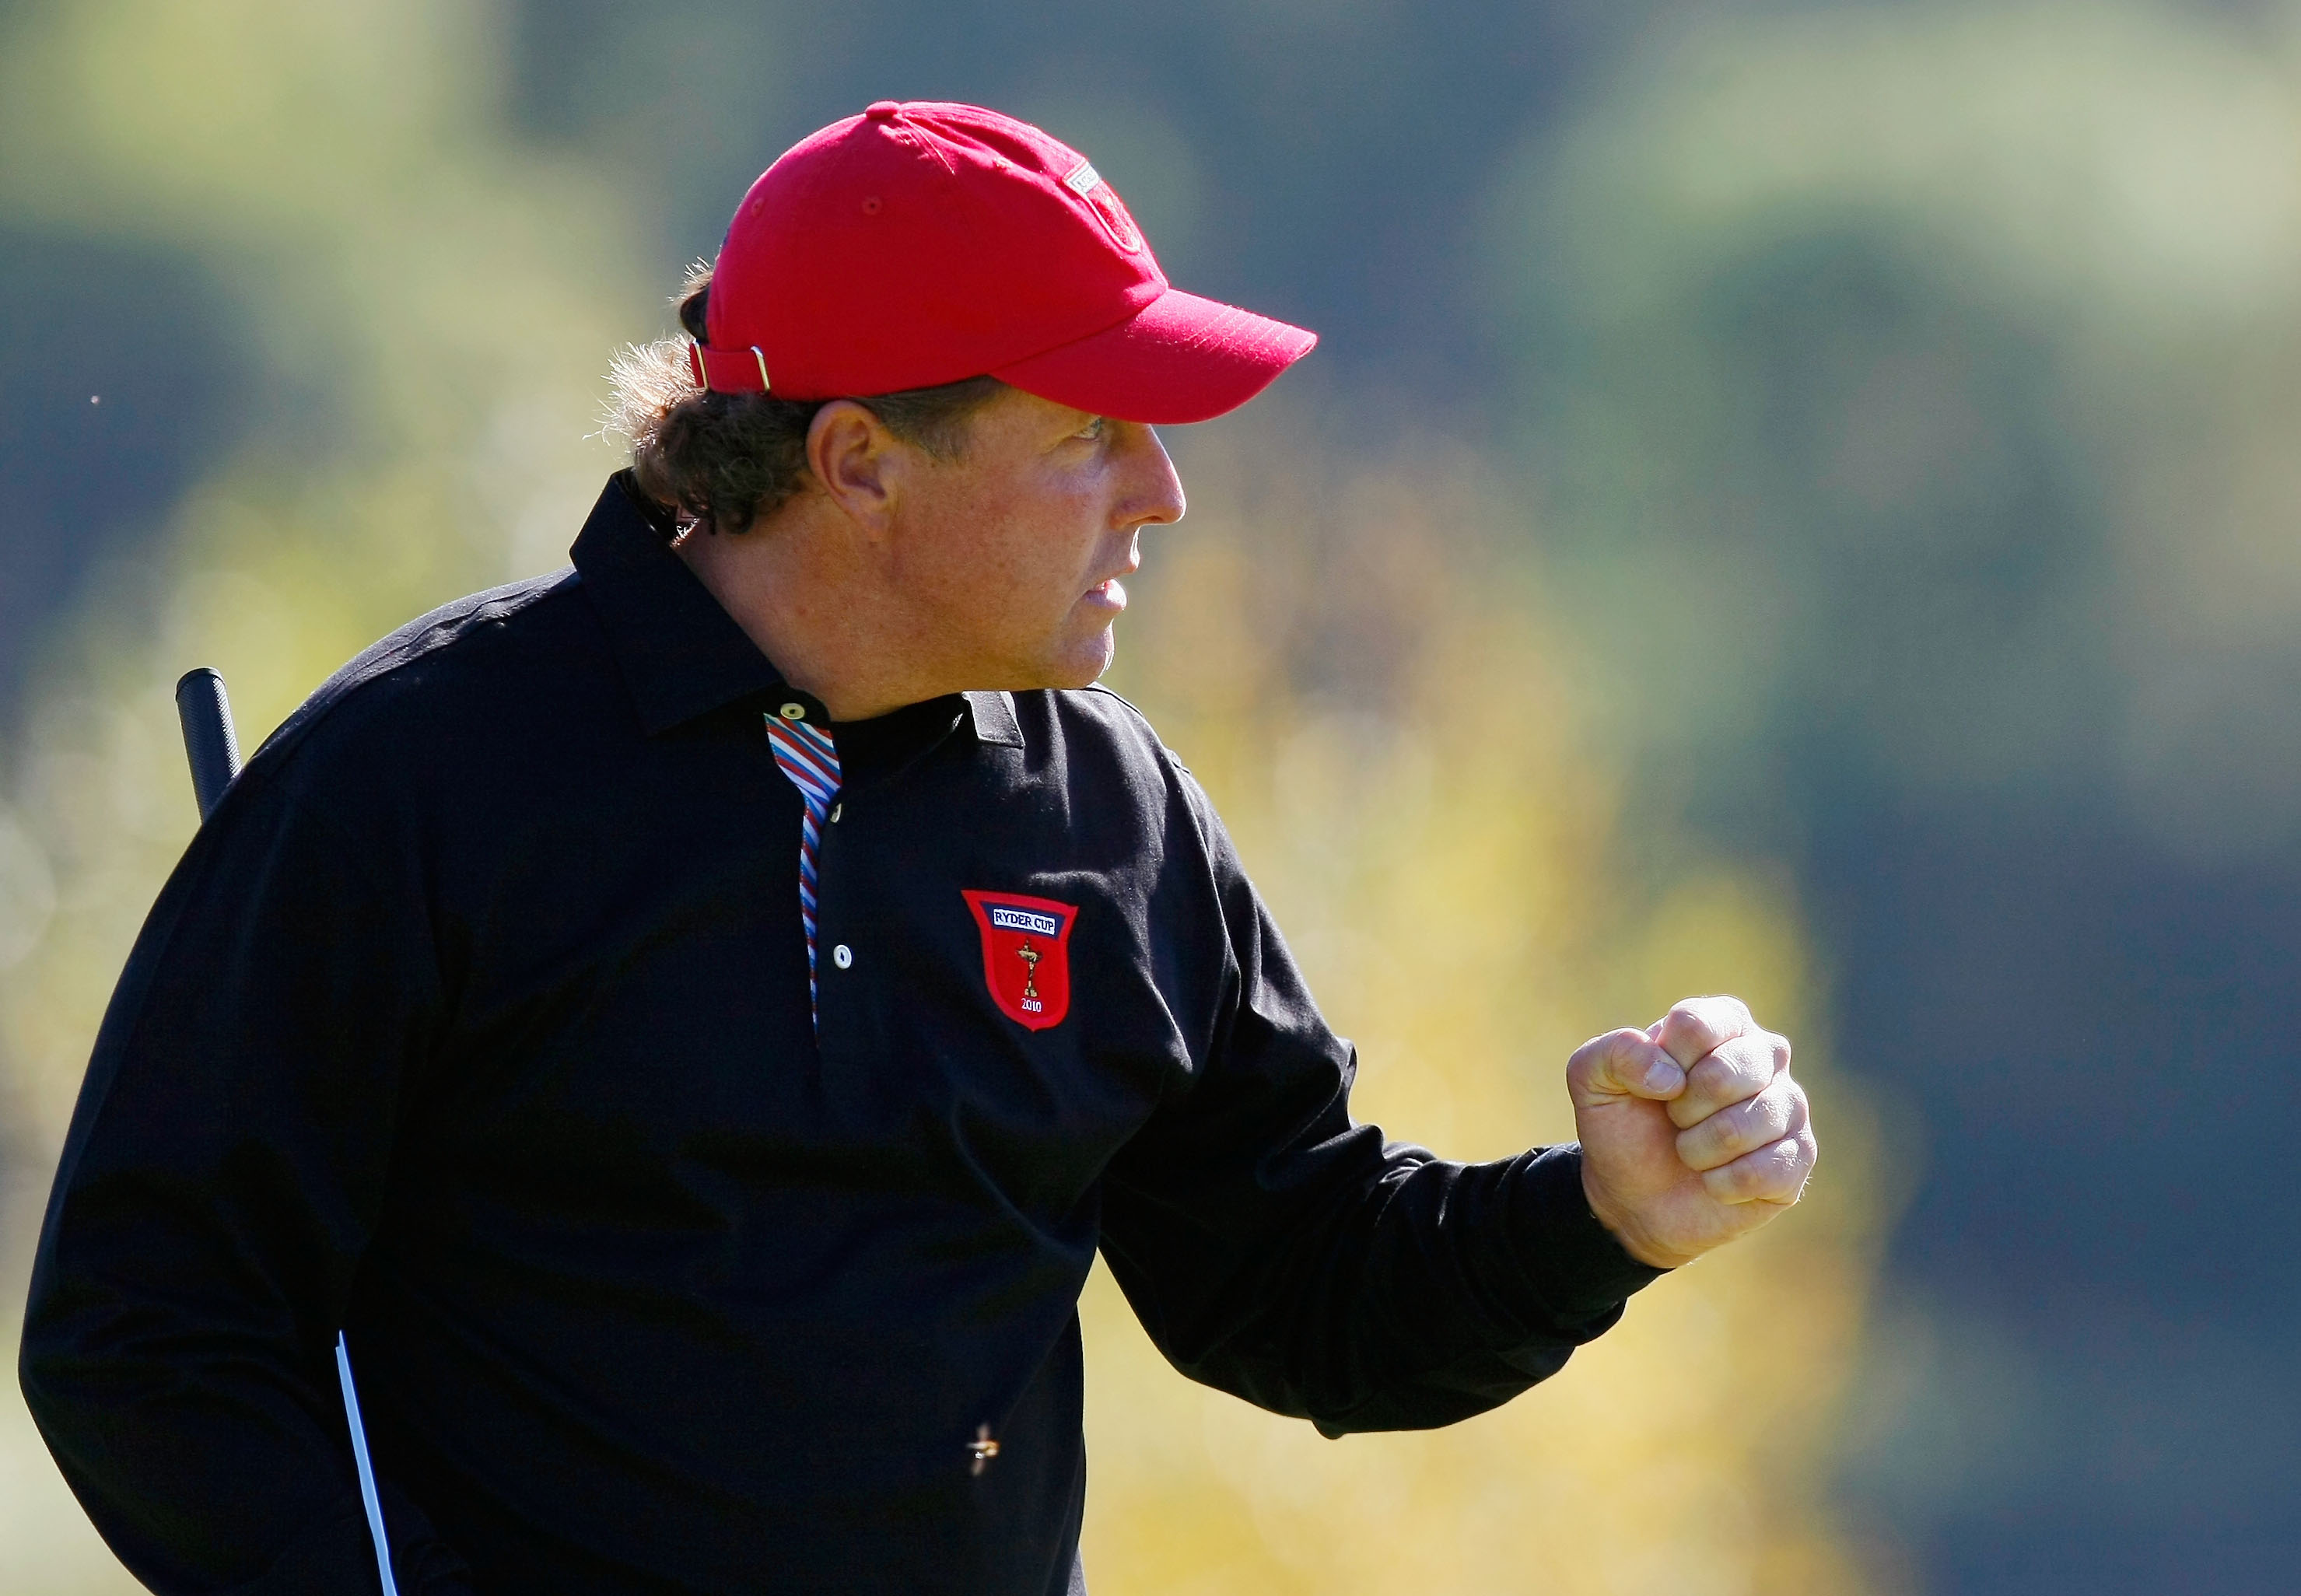 NEWPORT, WALES - OCTOBER 04:  Phil Mickelson of the USA celebrates holing a putt in the singles matches during the 2010 Ryder Cup at the Celtic Manor Resort on October 4, 2010 in Newport, Wales.  (Photo by Tom Dulat/Getty Images)